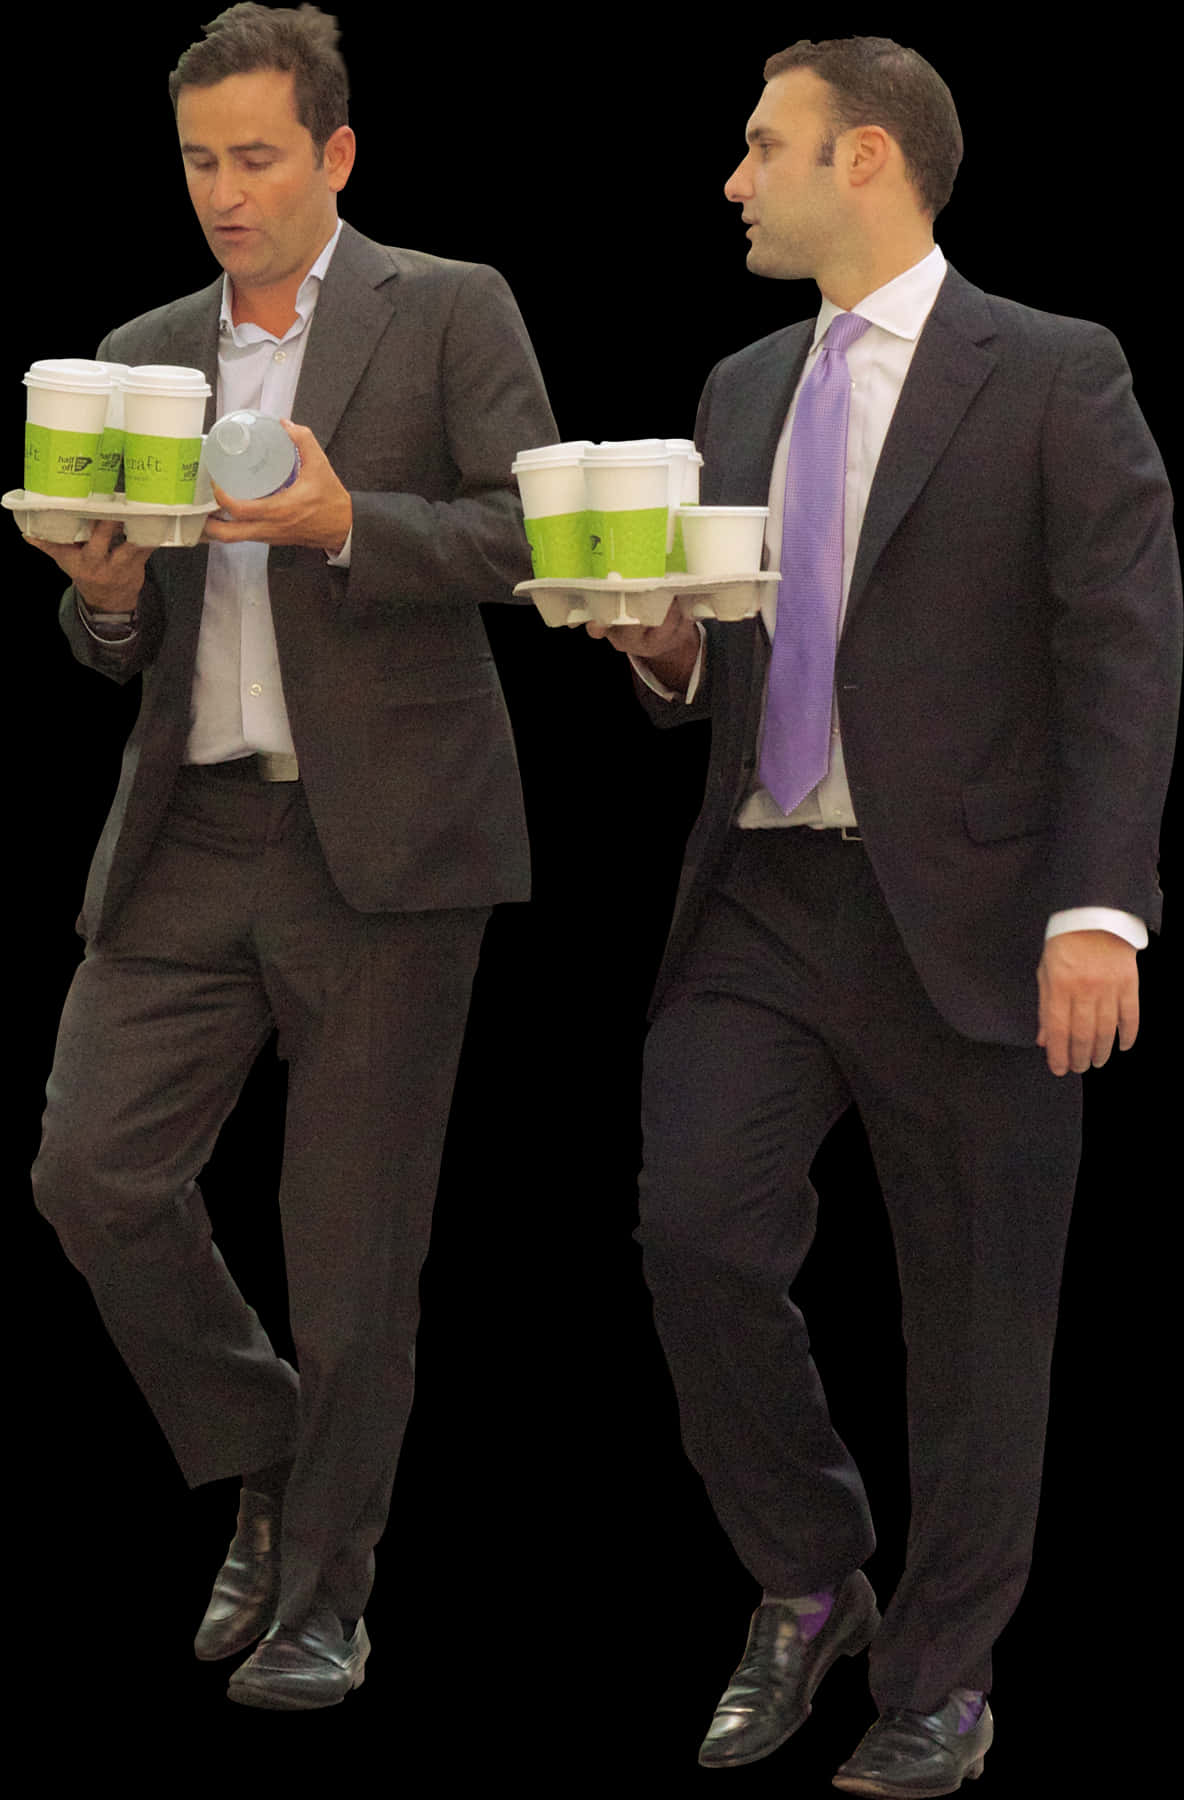 A Couple Of Men In Suits Carrying Coffee Cups